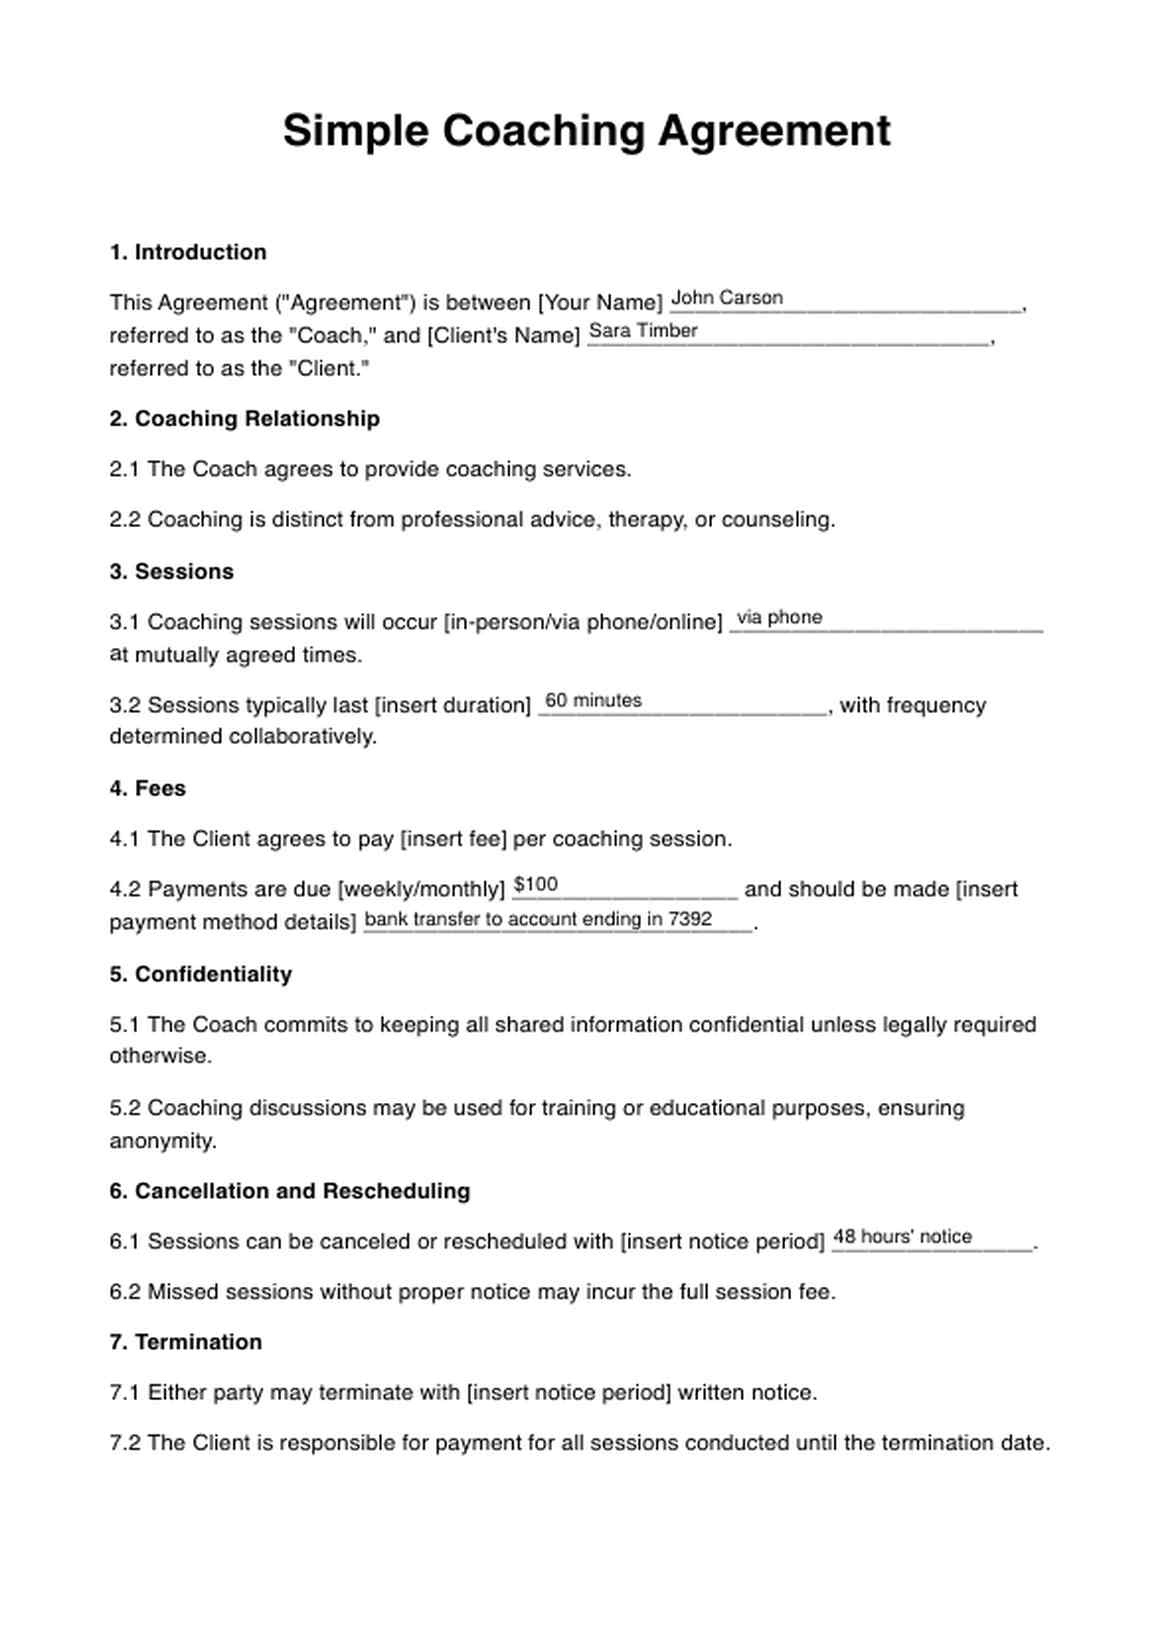 Simple Coaching Agreement PDF Example